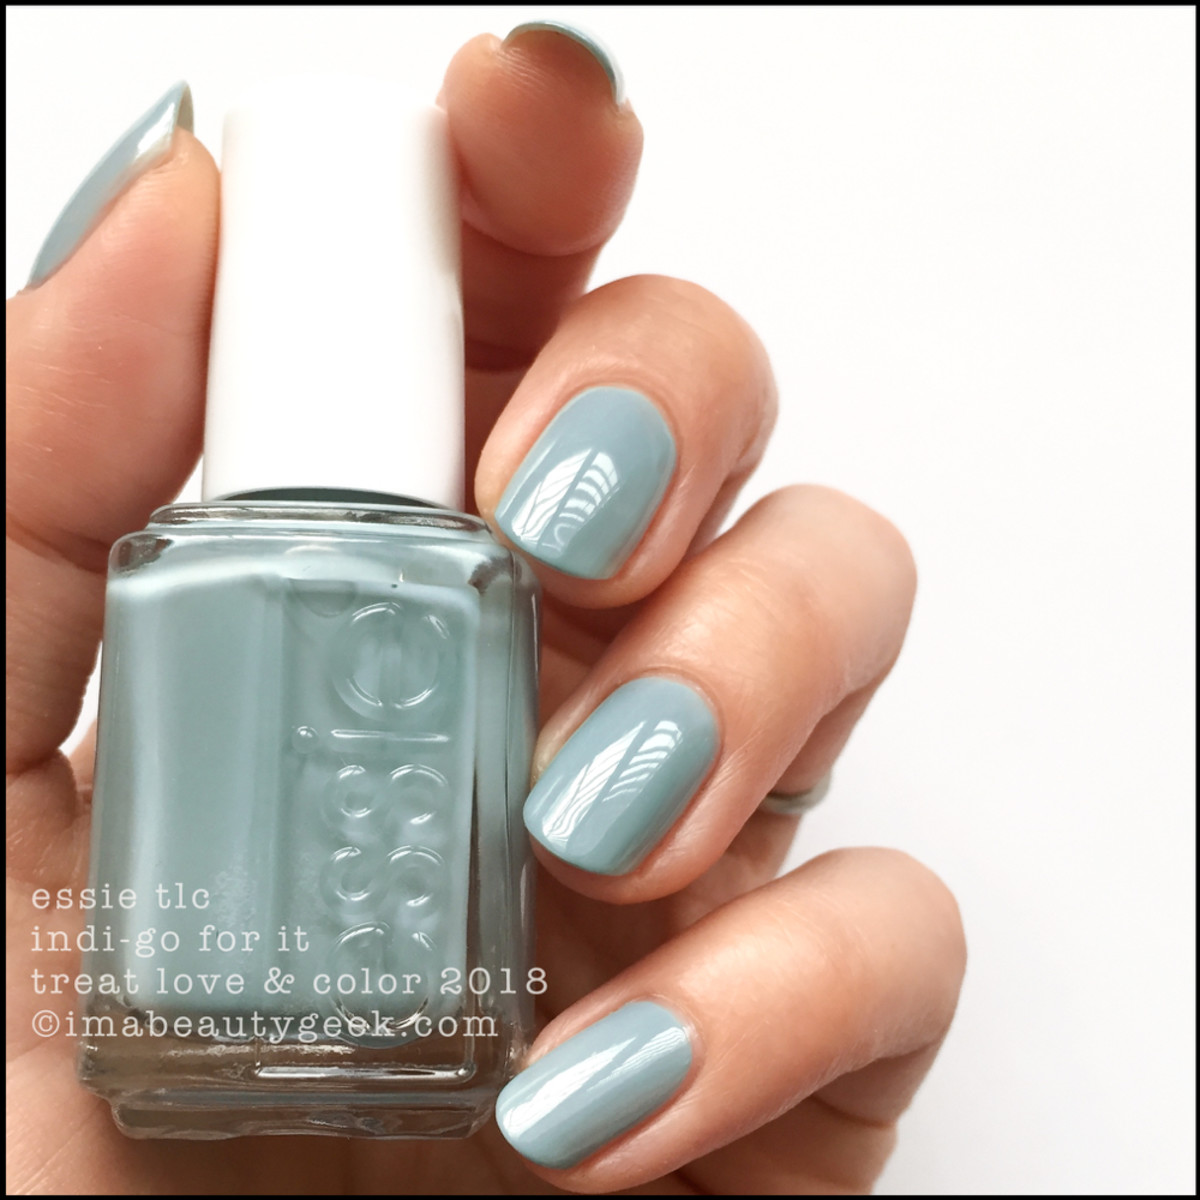 Essie TLC Indi-go For It _ Essie Treat Love Color Swatches 2018 Shade Expansion